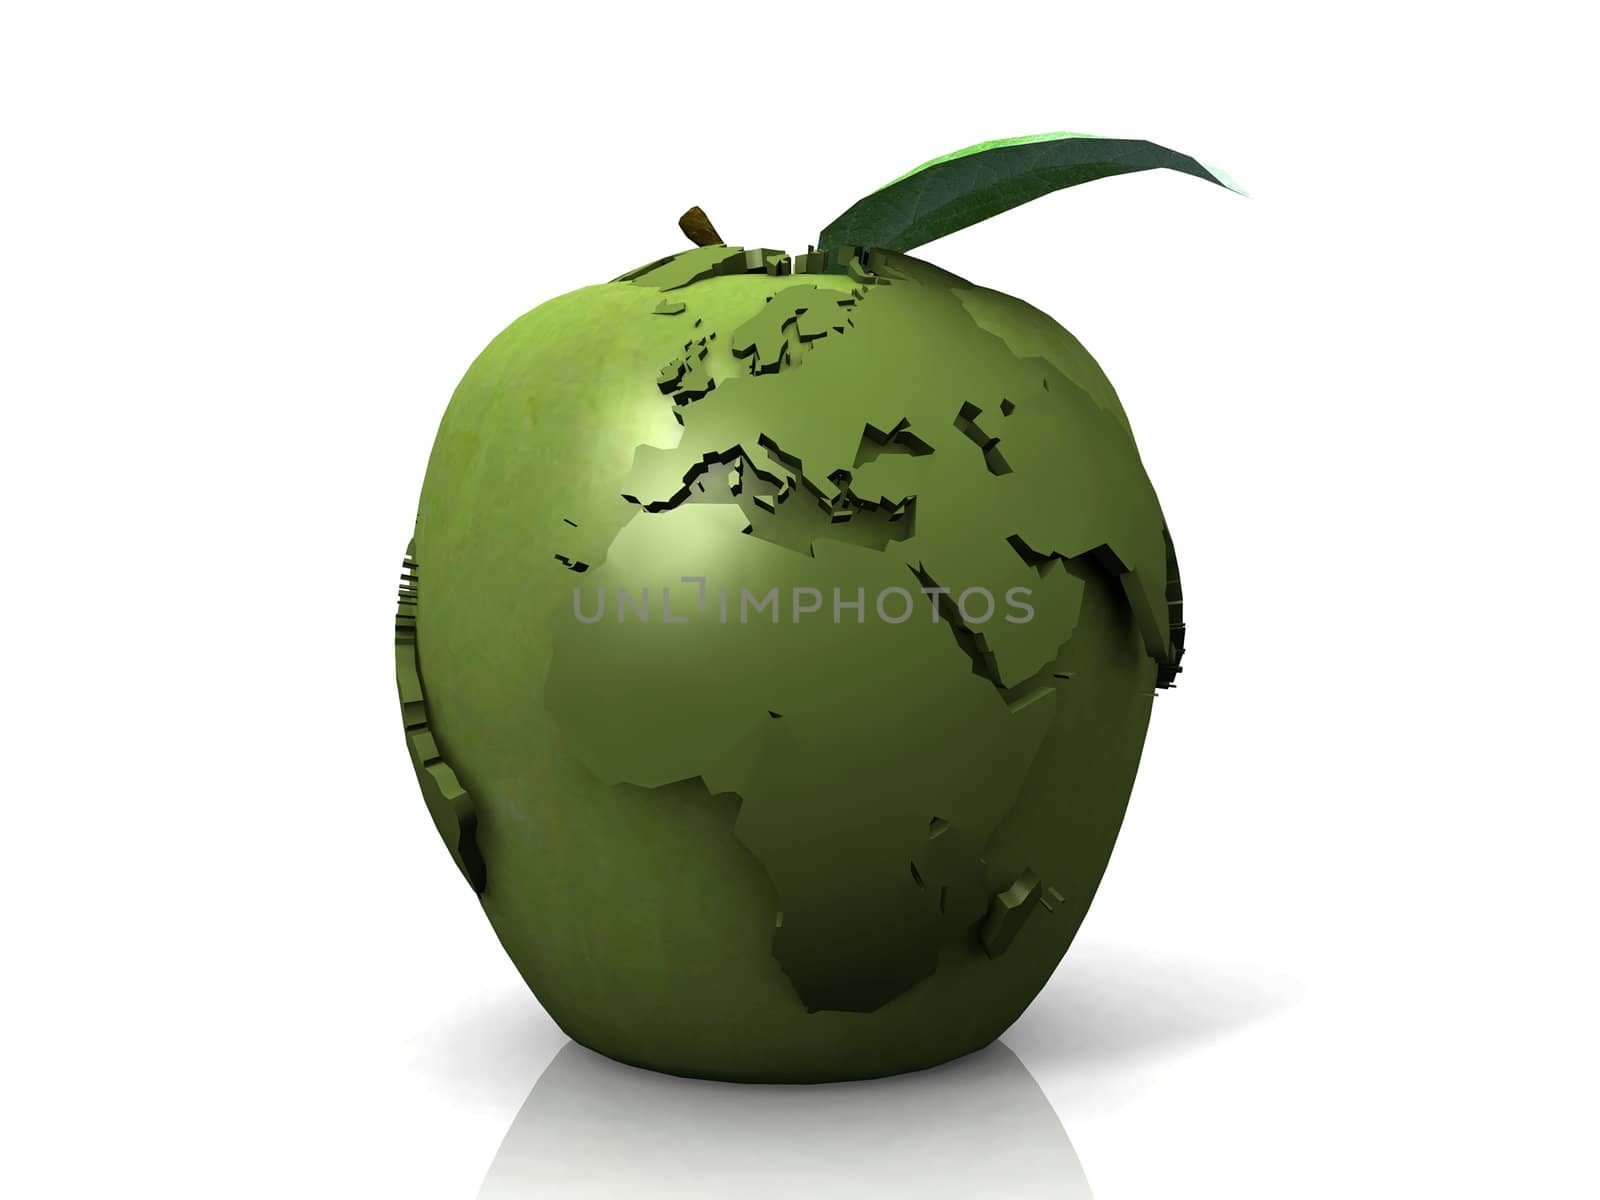 the apple and the earth by njaj